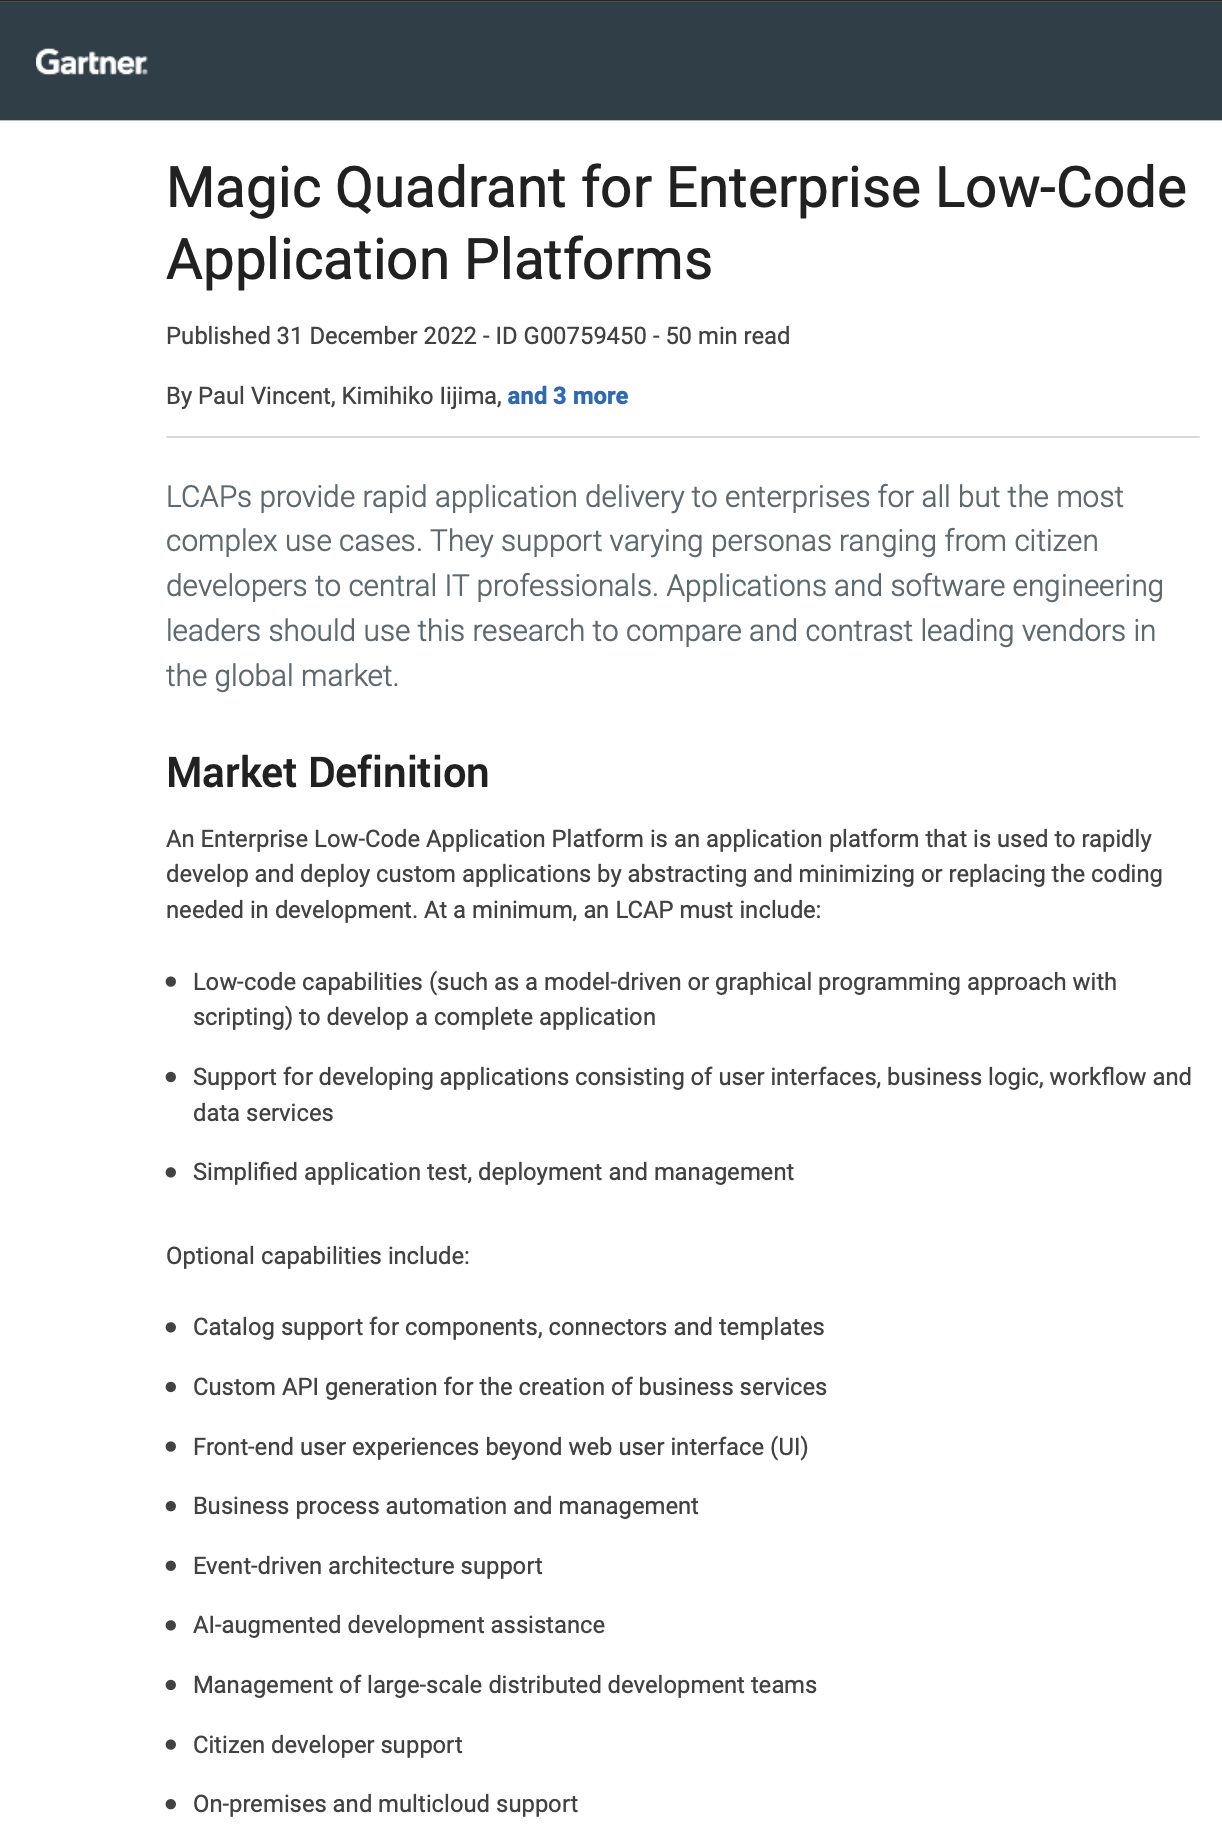 Gartner positioned Kintone within its LCAP vendor report, which is used by applications and software engineering leaders to compare and contrast leading vendors in the global market.